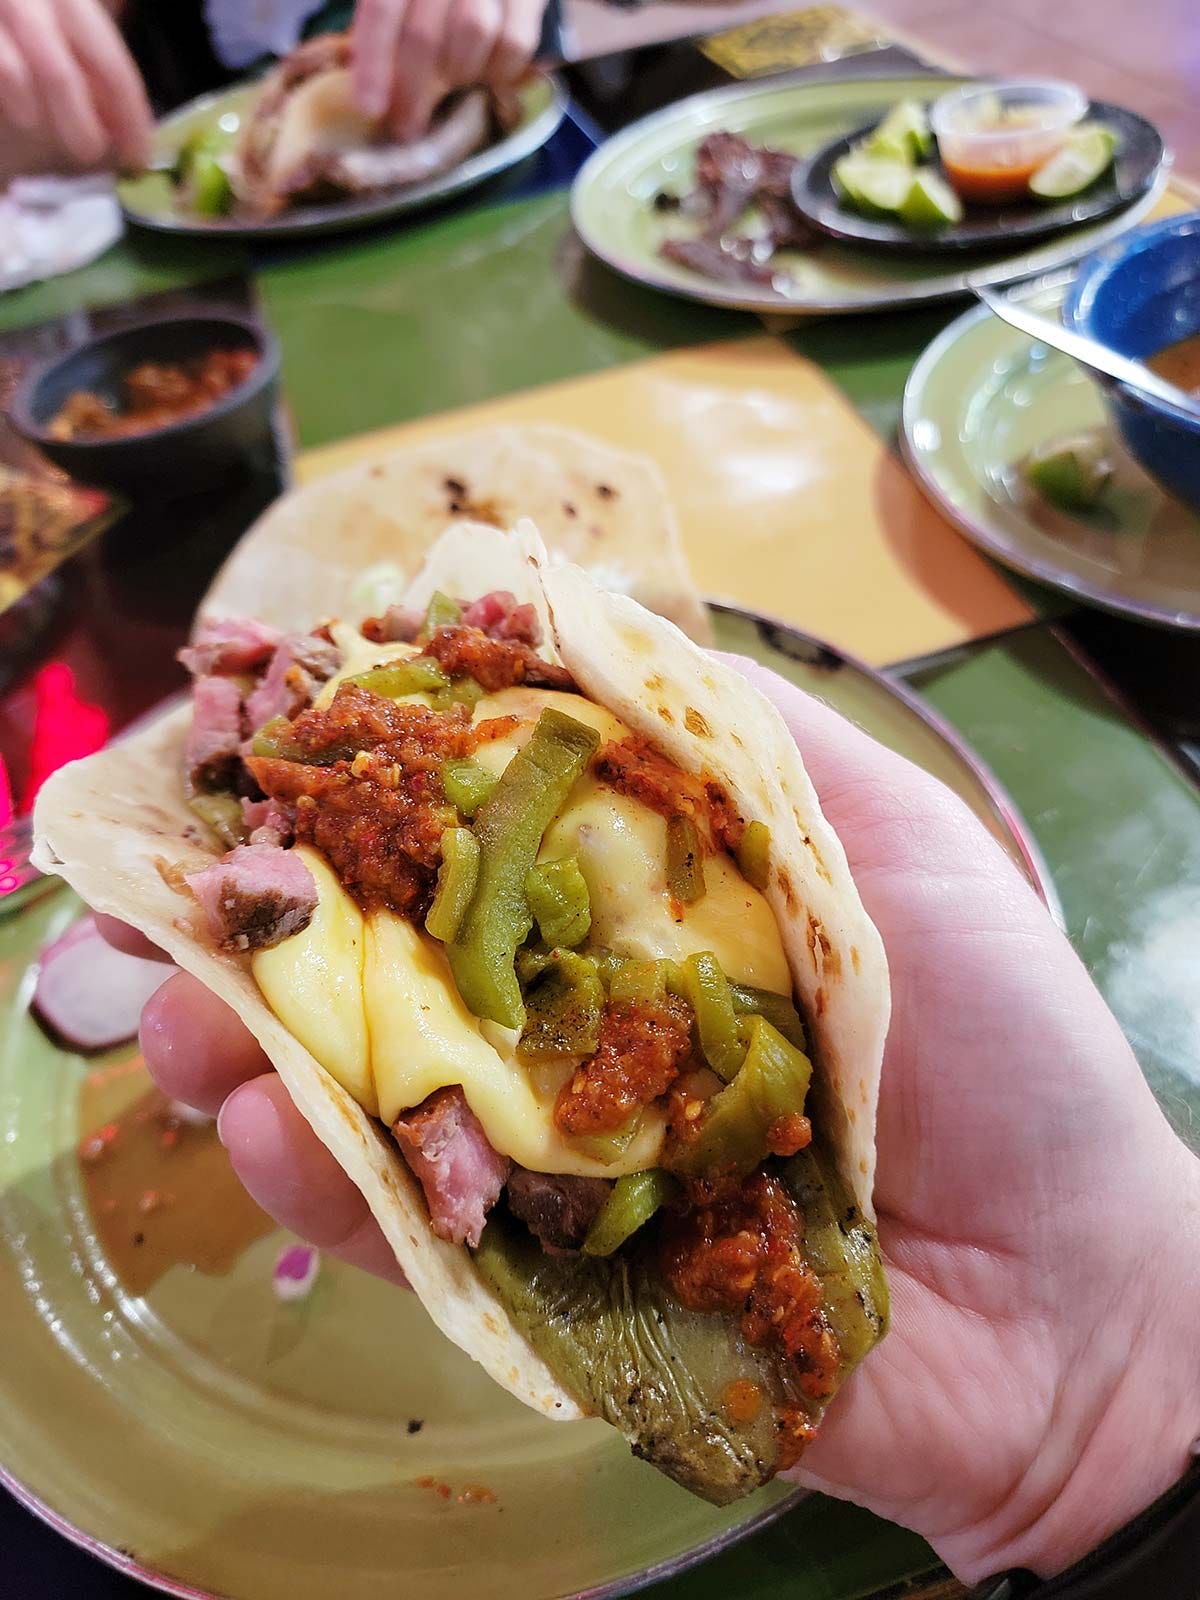 Holding a beef and nopales taco. 